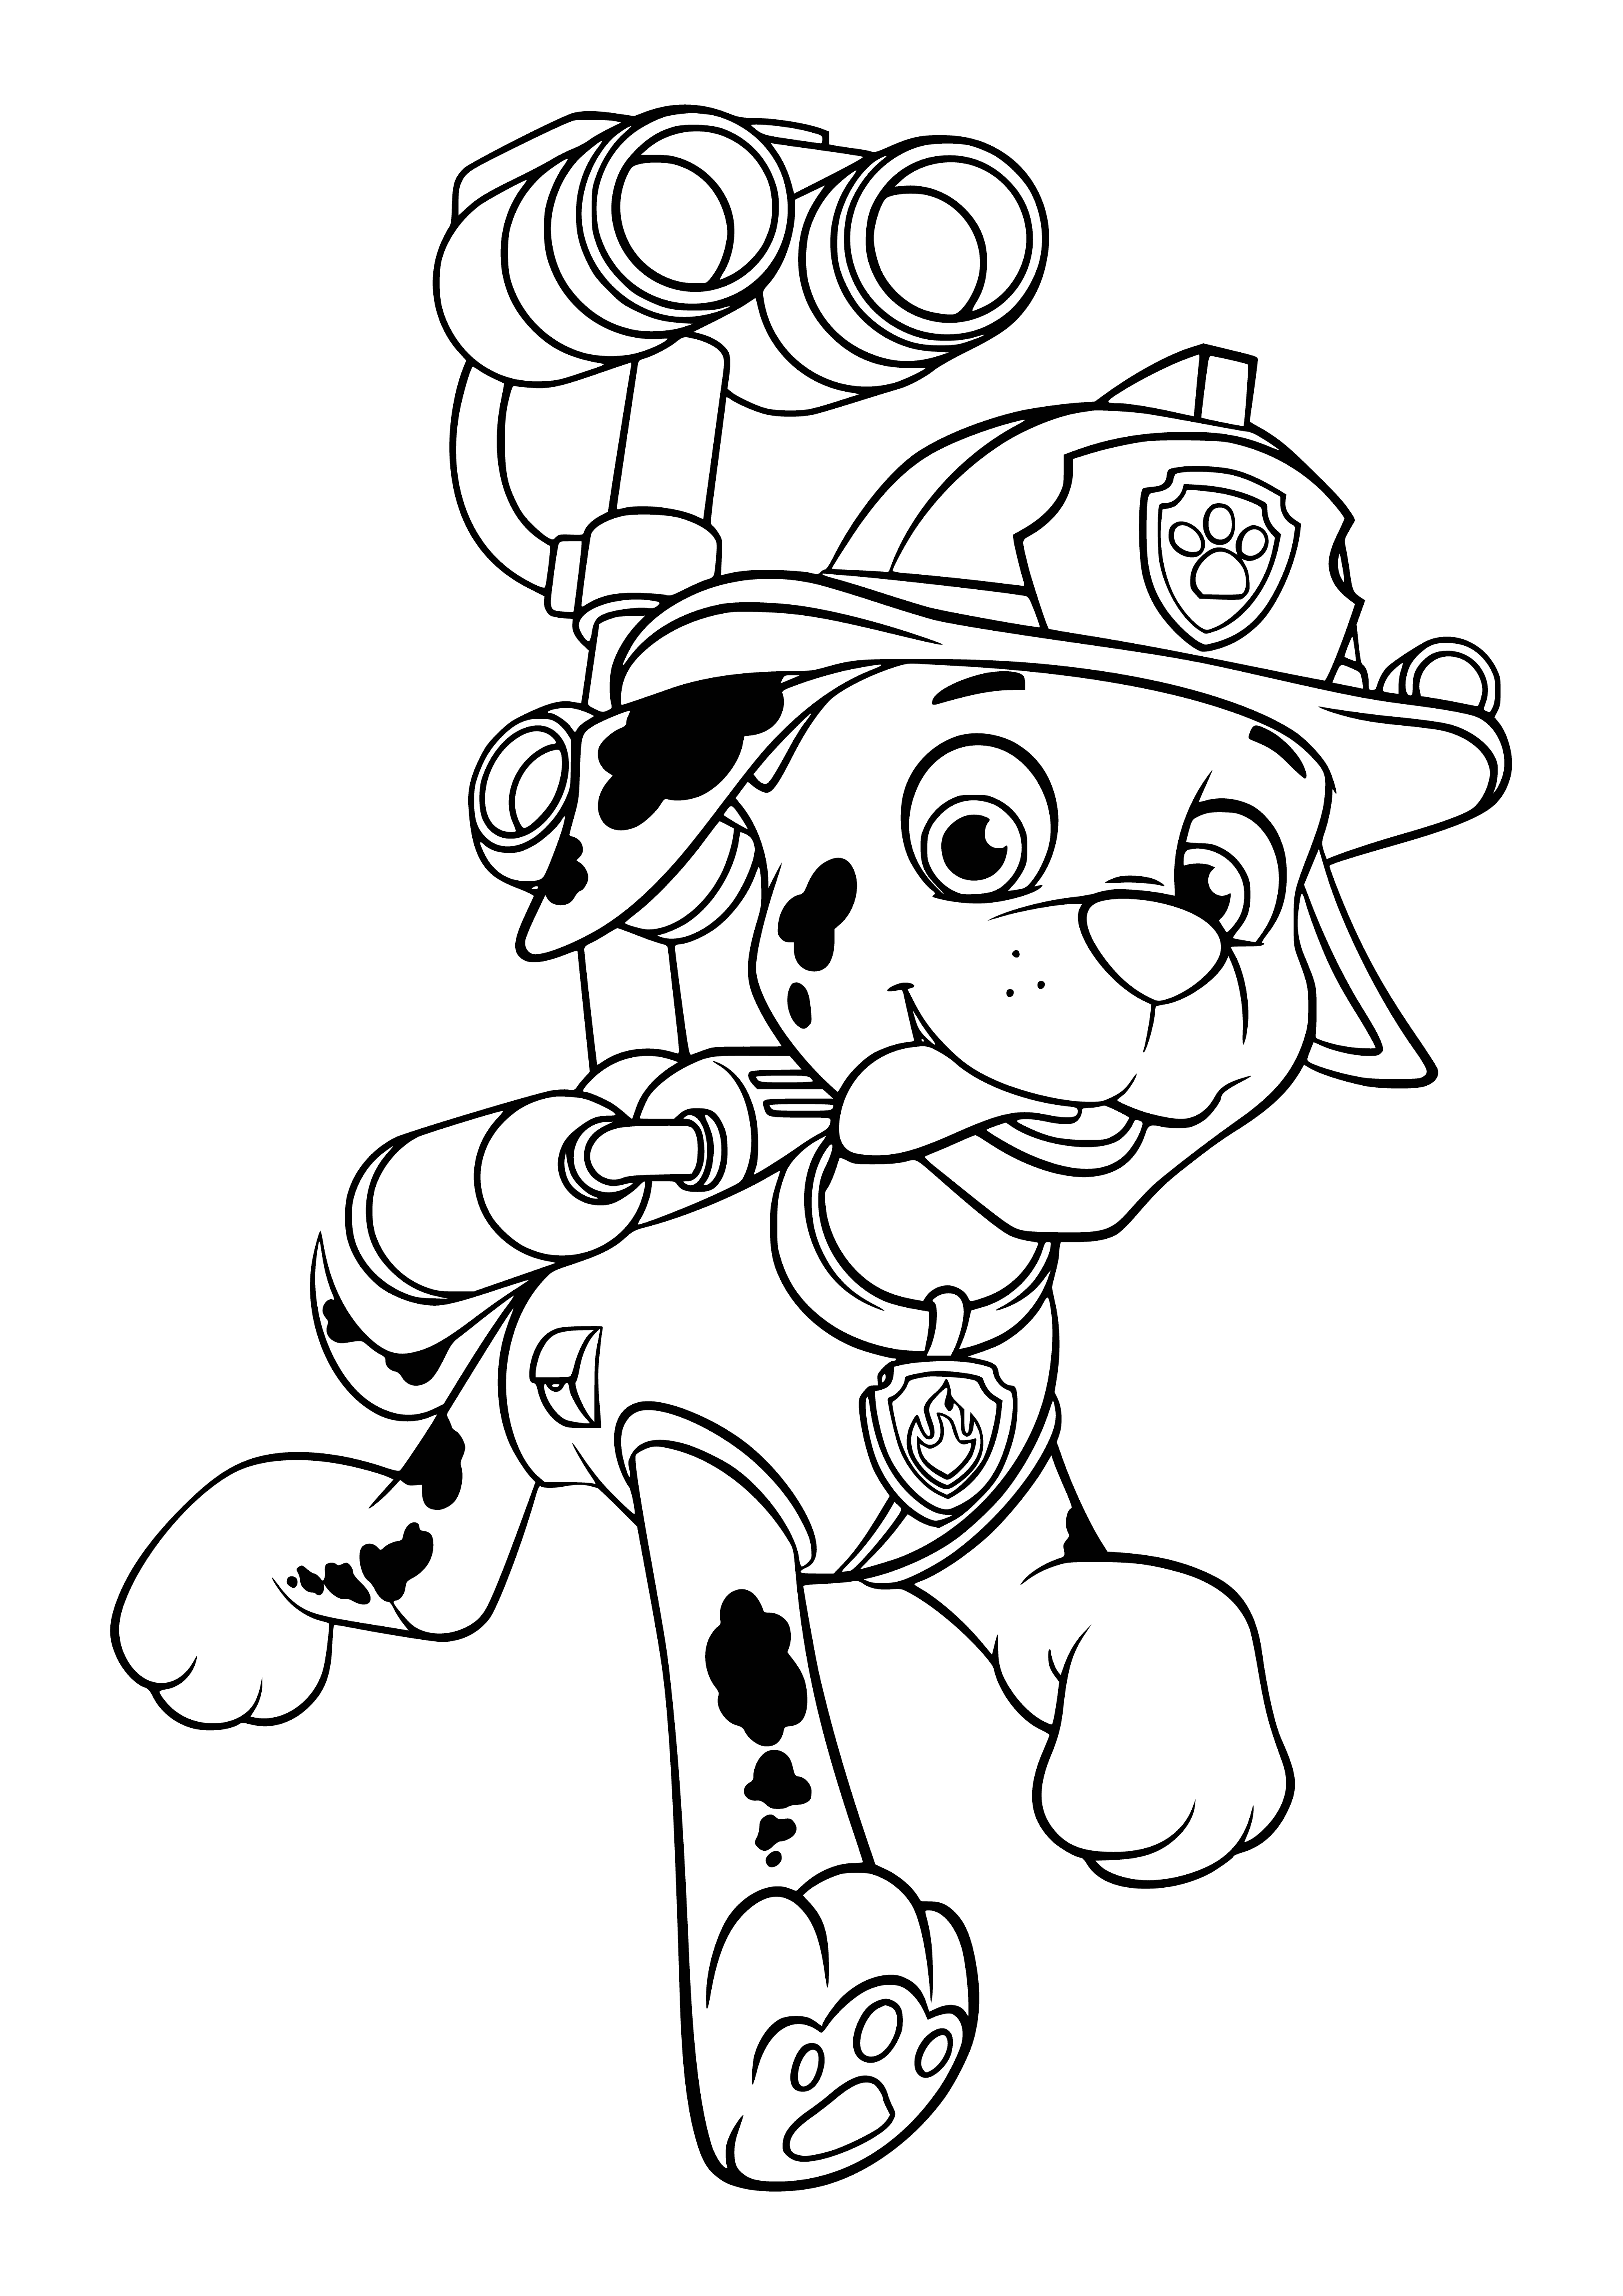 coloring page: Marshal is a fire pup for the PAW Patrol. He uses a bulldozer to help put out fires. #pawpatrol #FireFighter